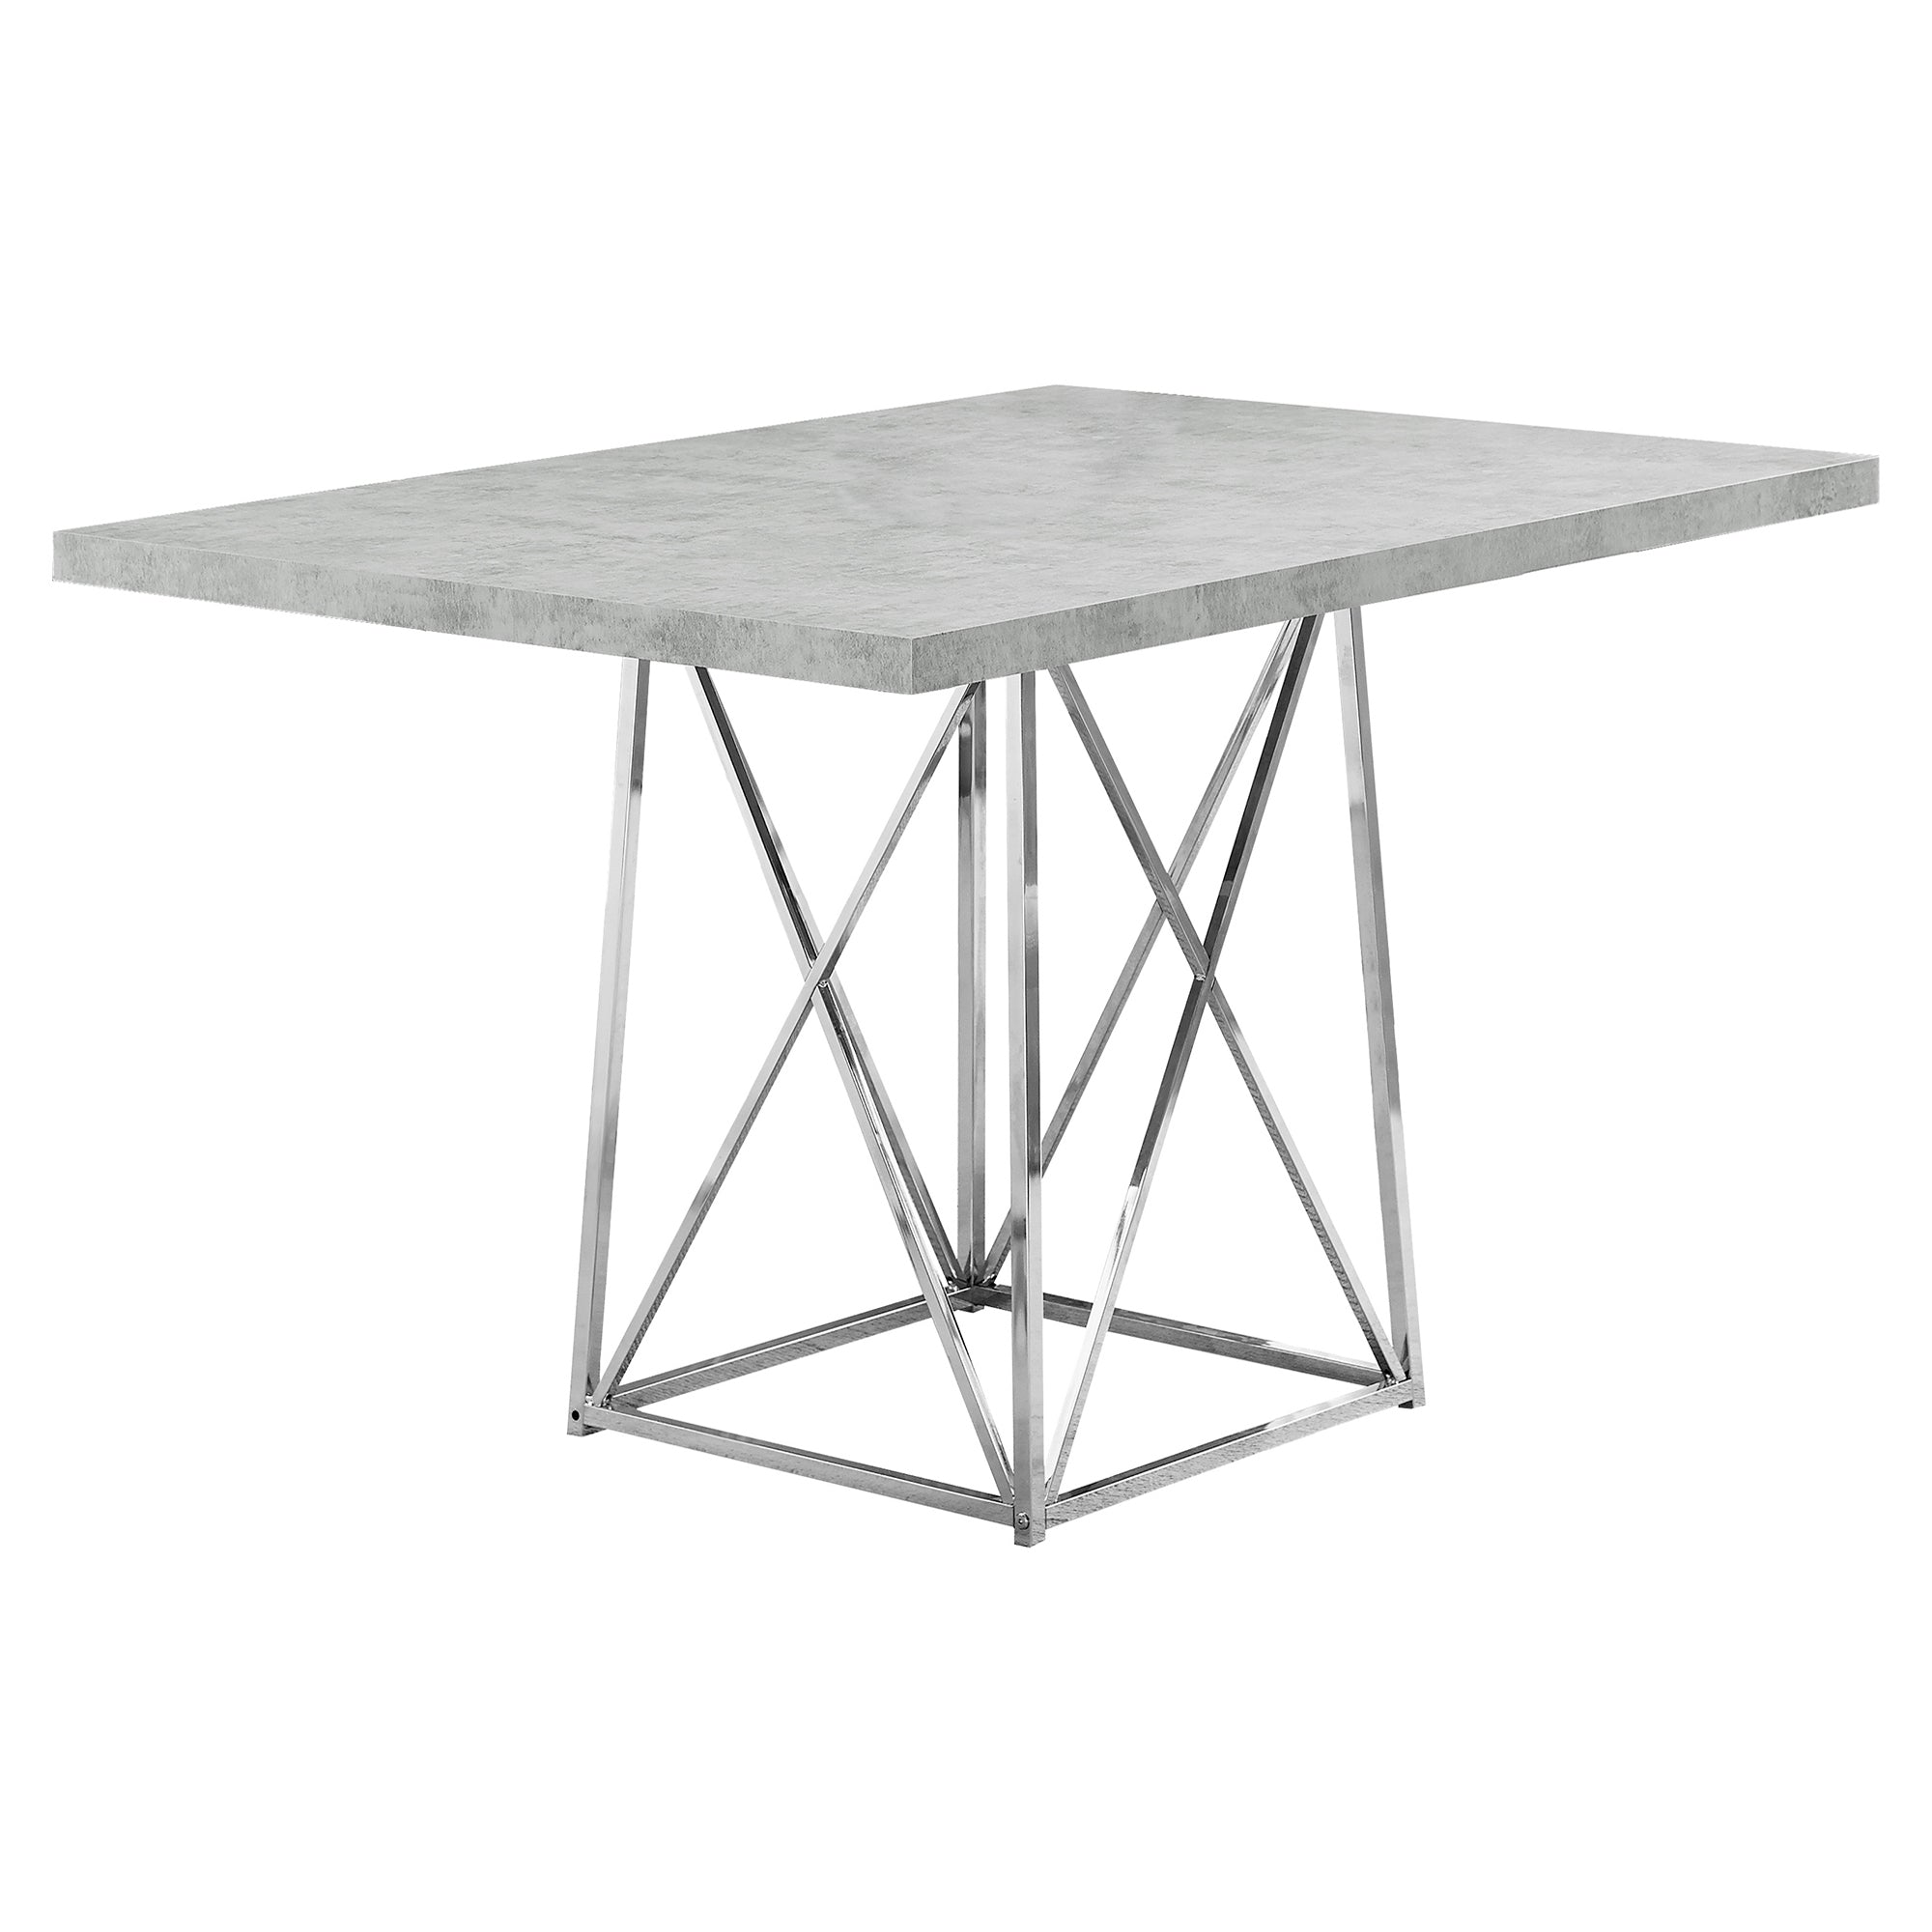 MN-241043    Dining Table, 48" Rectangular, Metal, Kitchen, Dining Room, Metal Base, Laminate, Grey Cement Look, Chrome, Contemporary, Modern